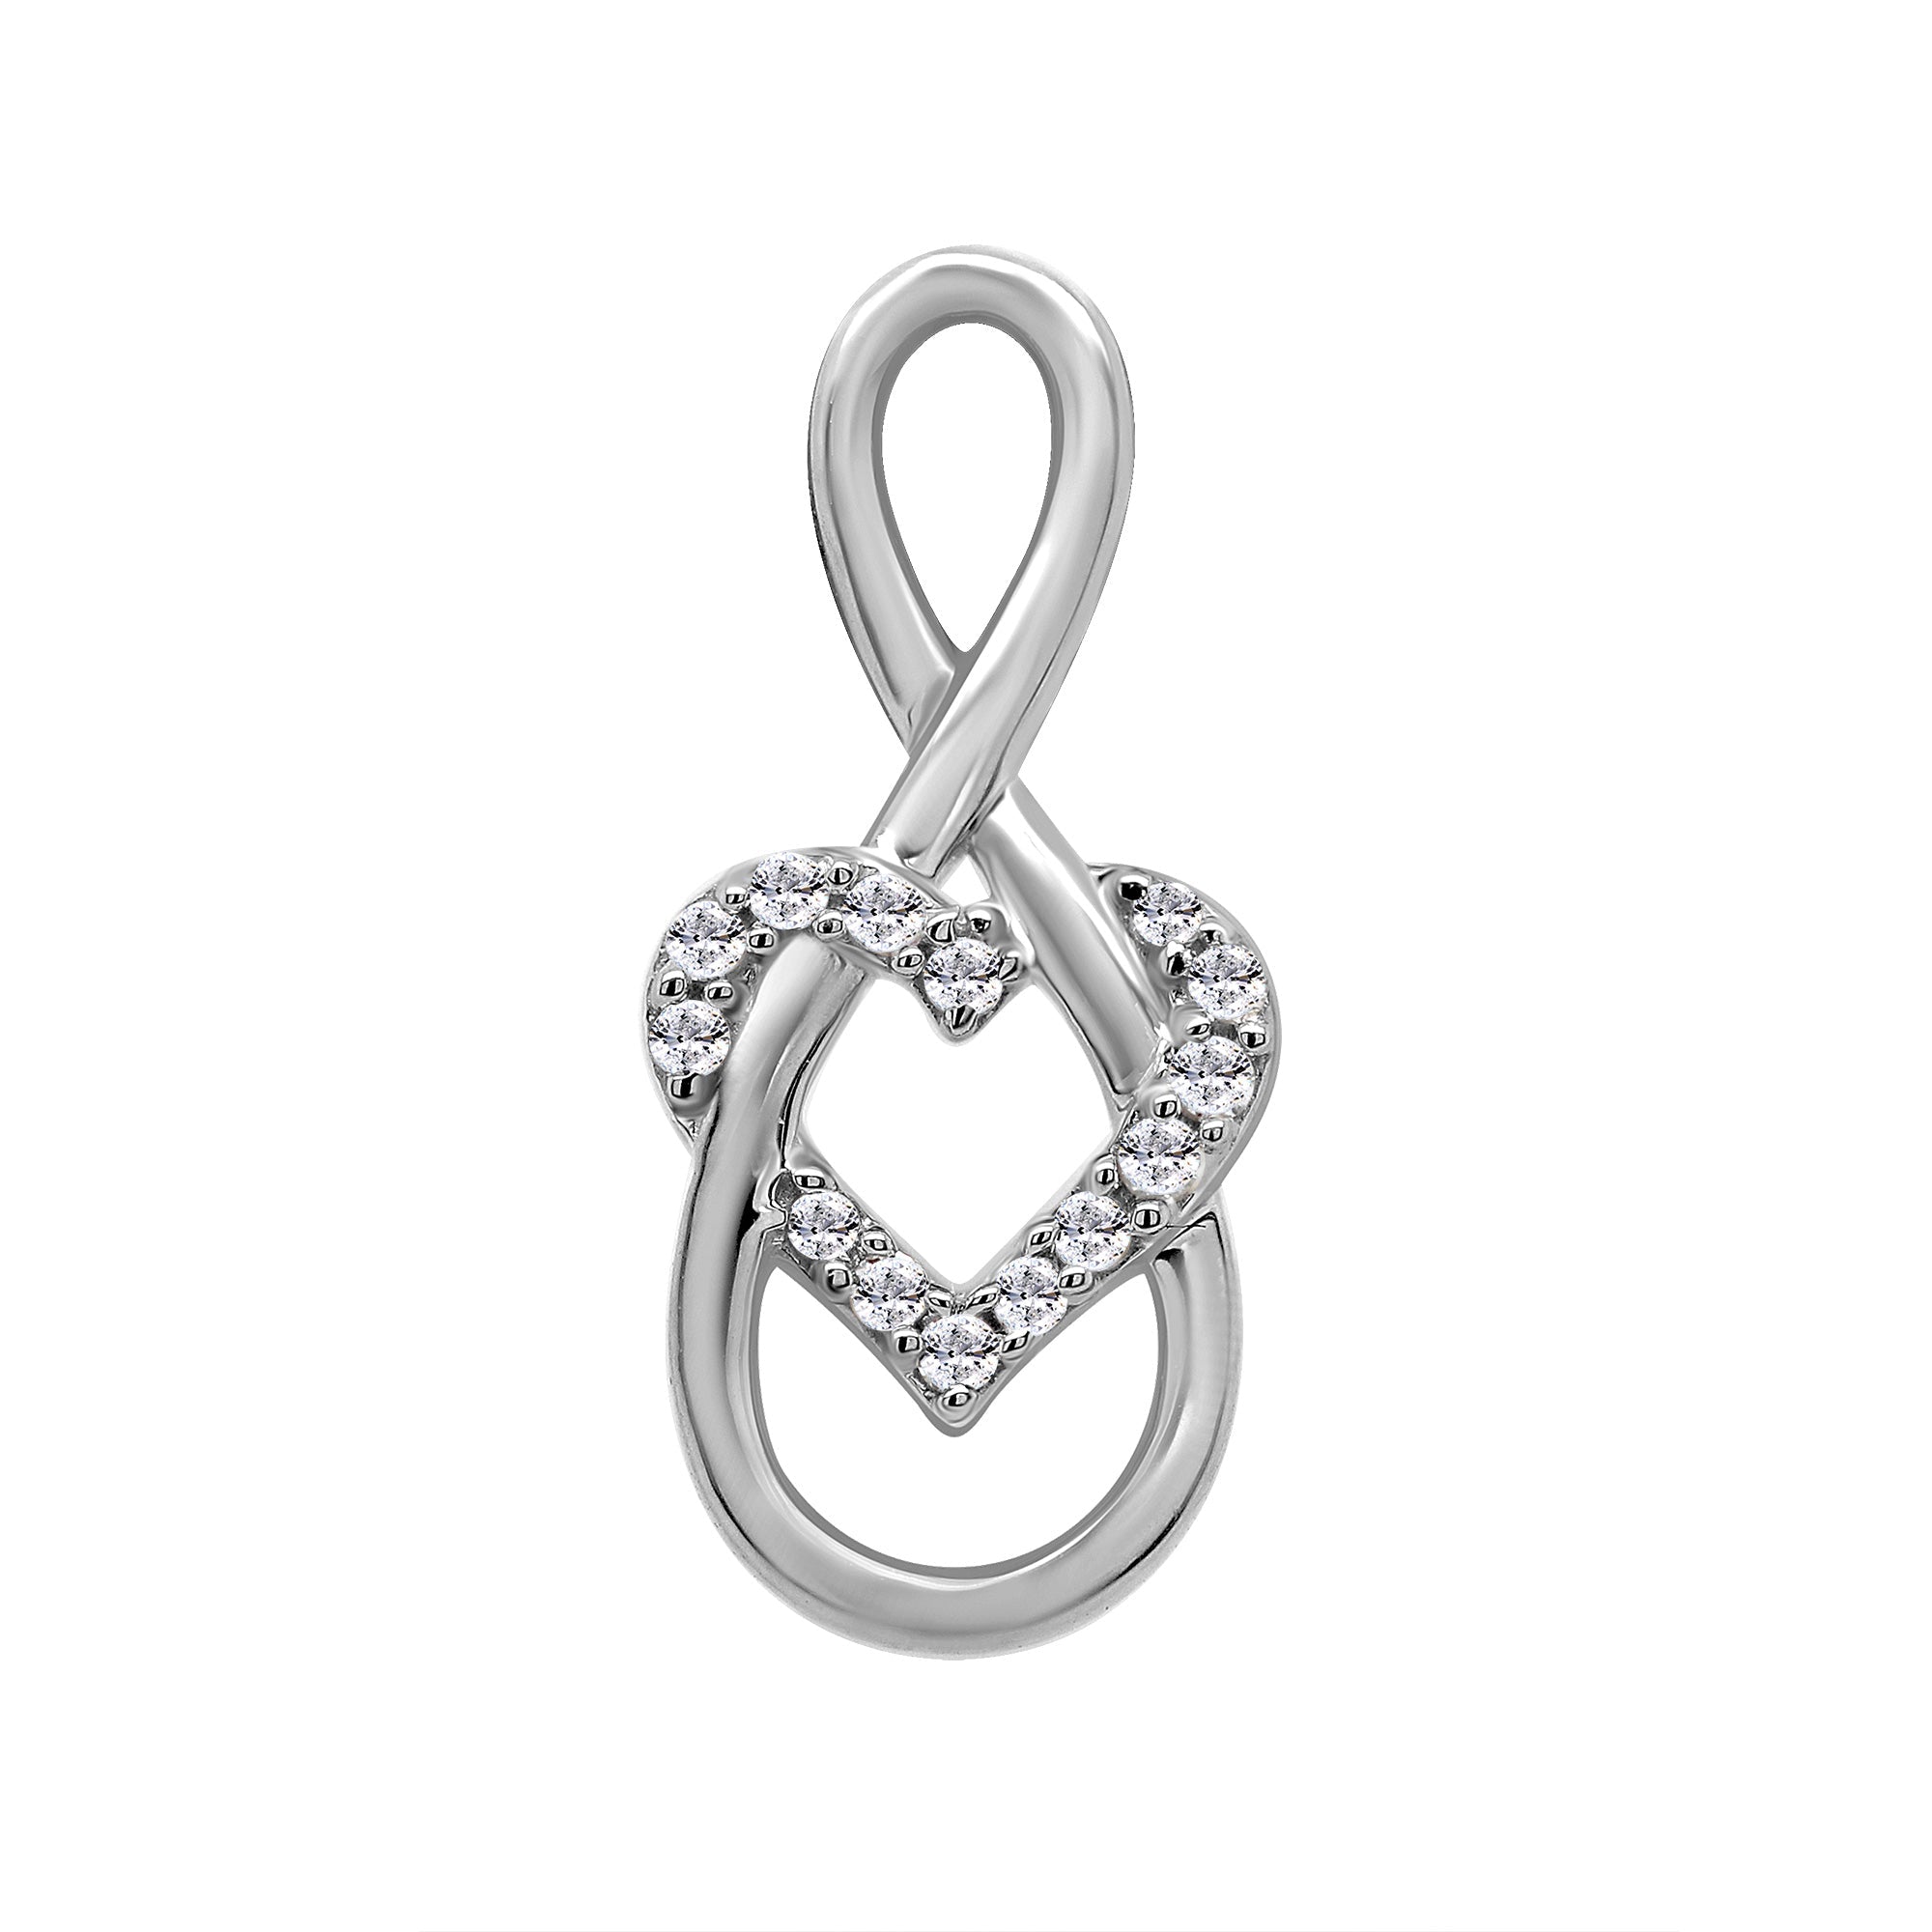 9ct white gold infinity pendant with diamond set entwined heart 0.05ct